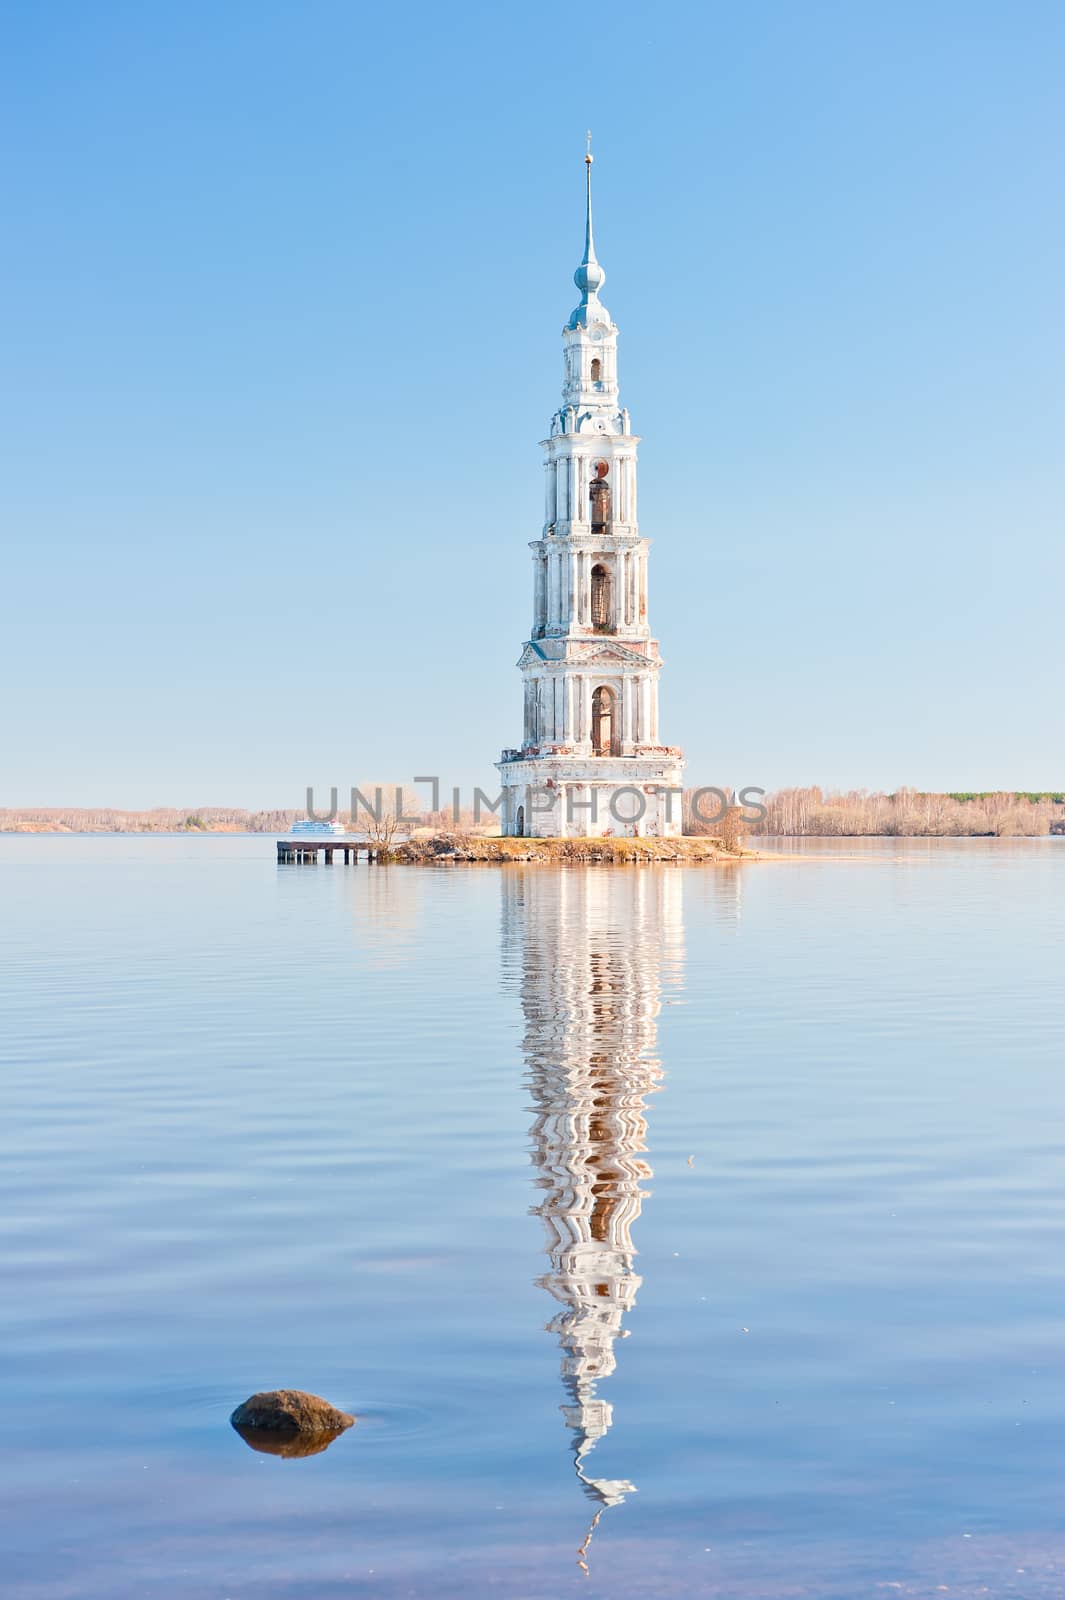 High belltower in the middle of the wide river by kosmsos111